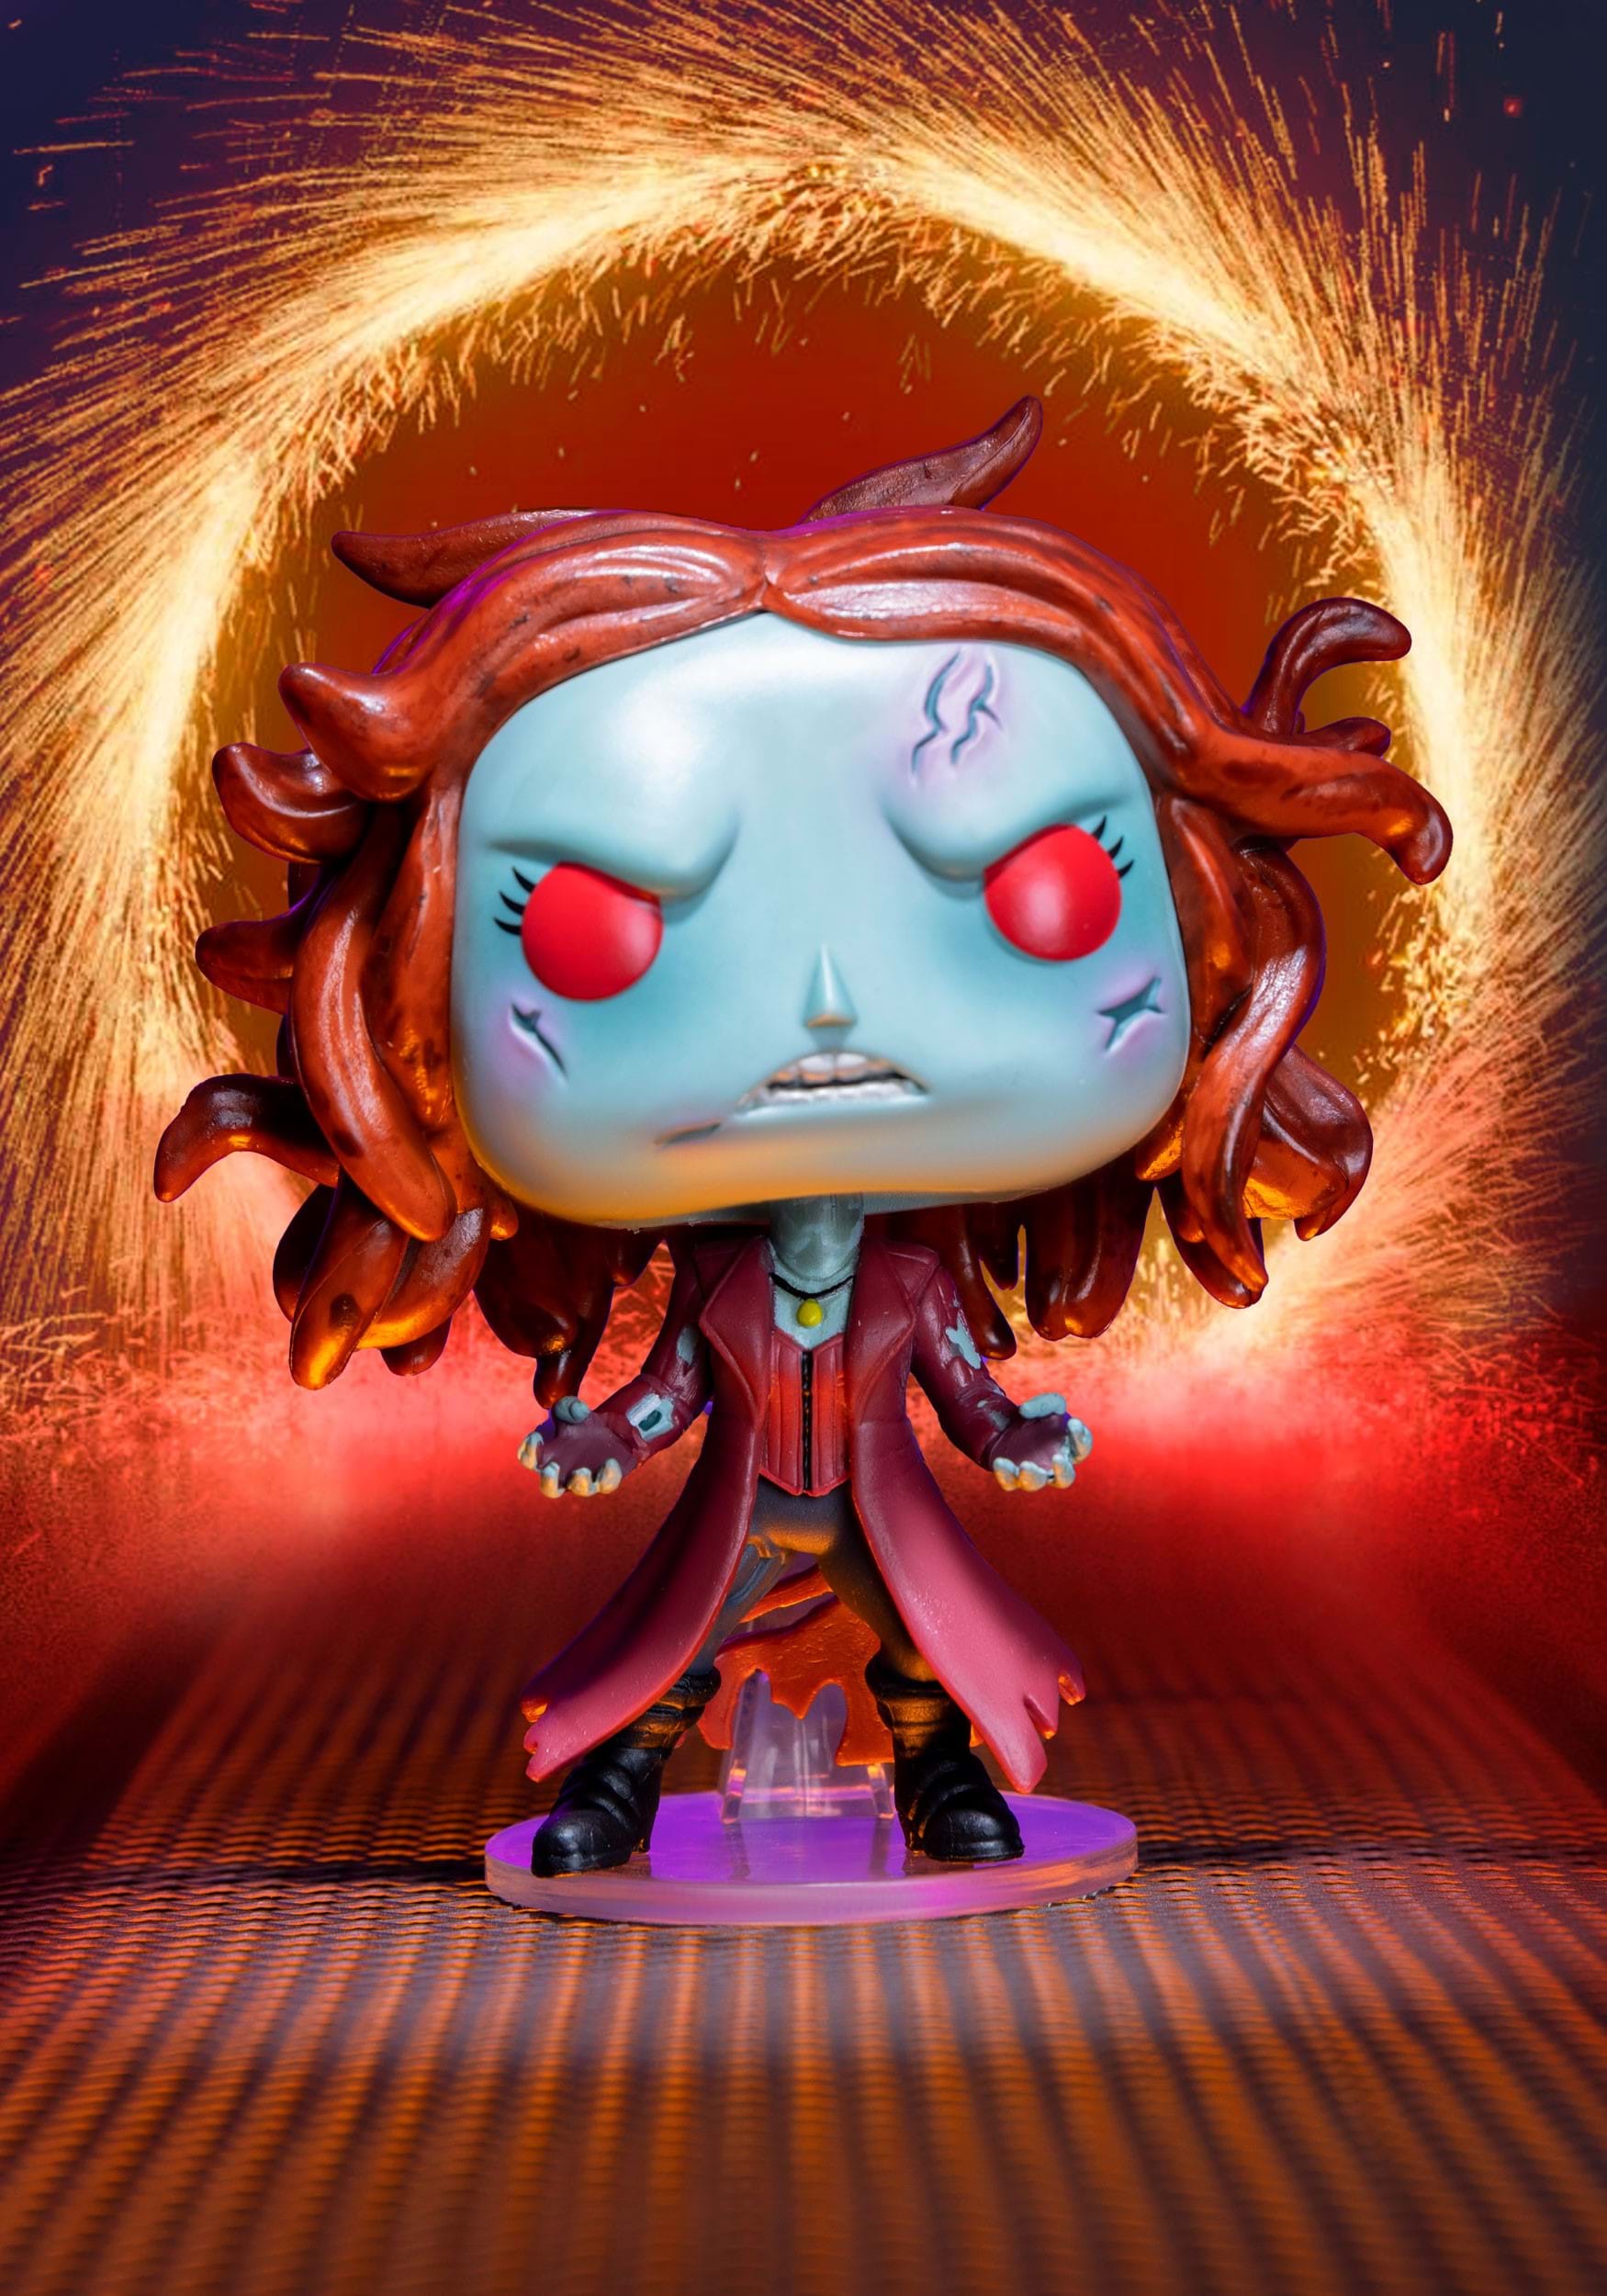 Funko POP Marvel: What If - Zombie Scarlet Witch FIgure